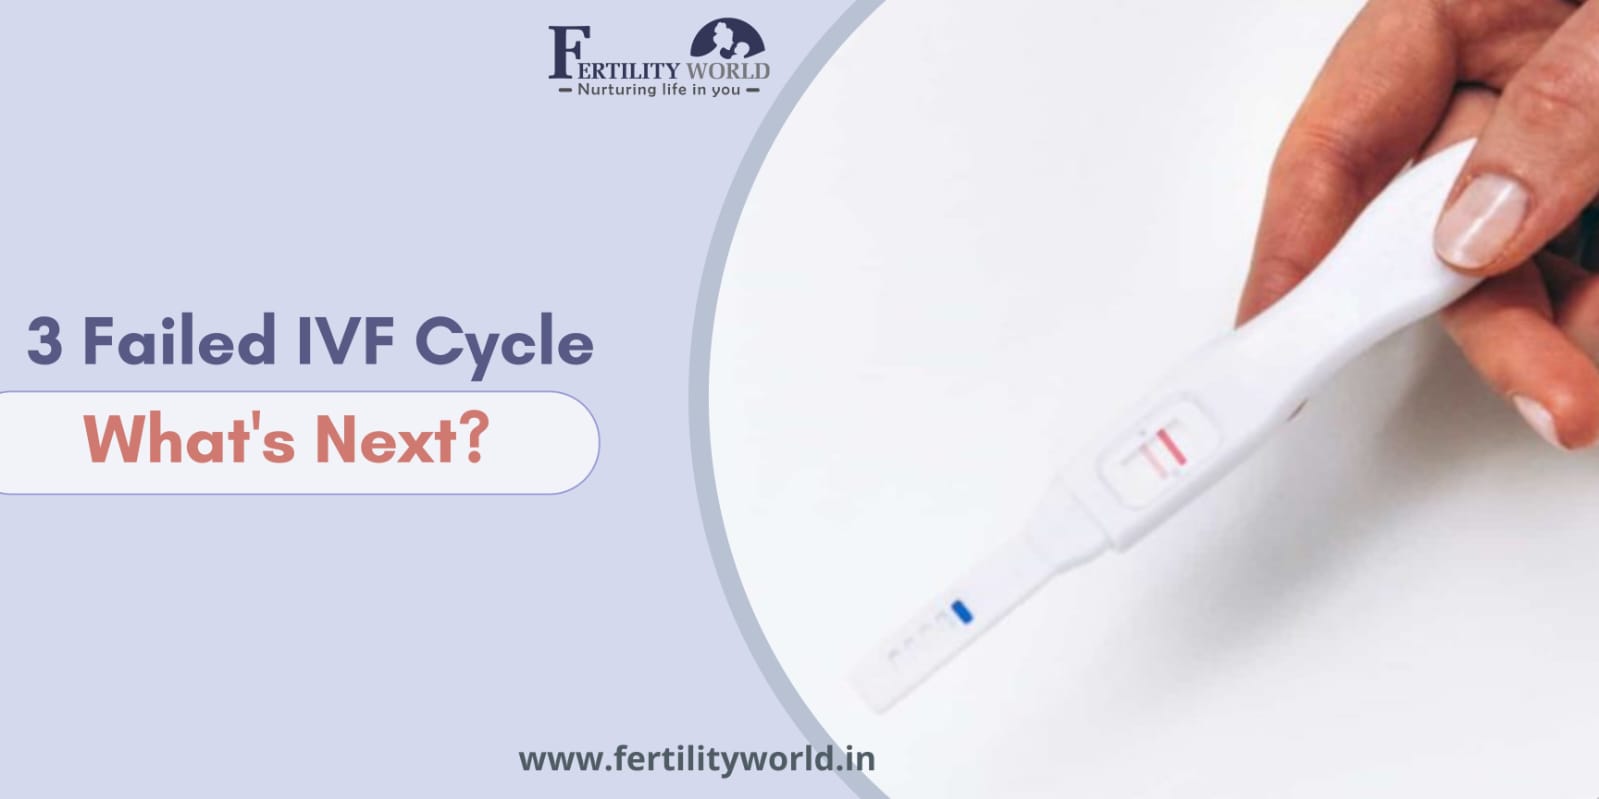 What to do next after 3 failed IVF cycles?